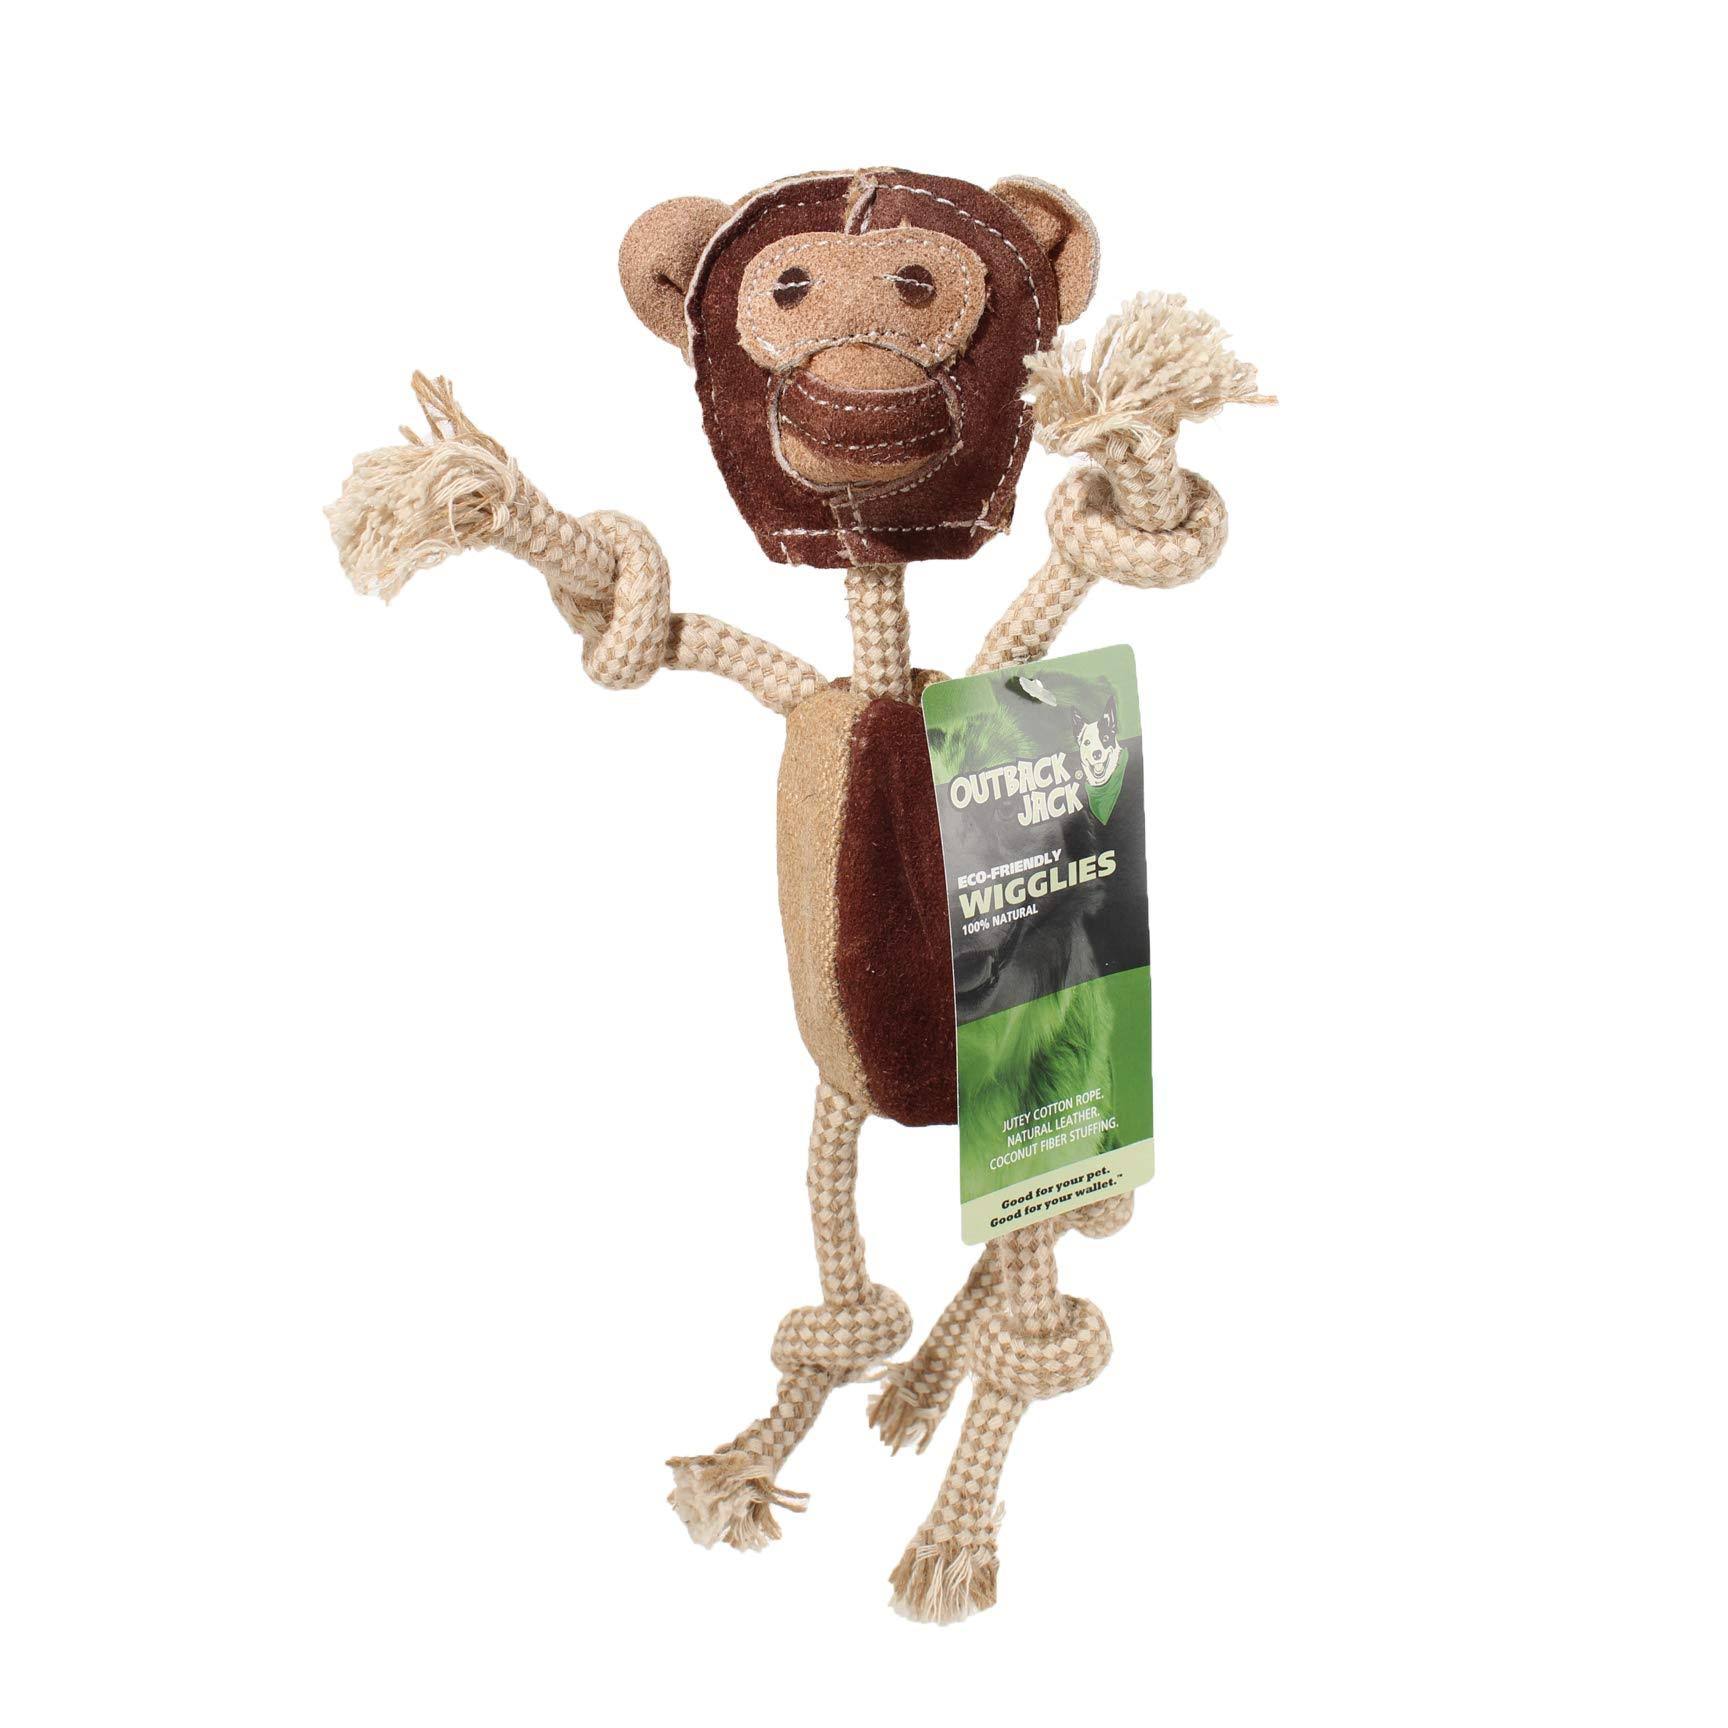 Outback Jack All-Natural Wigglies, Monkey